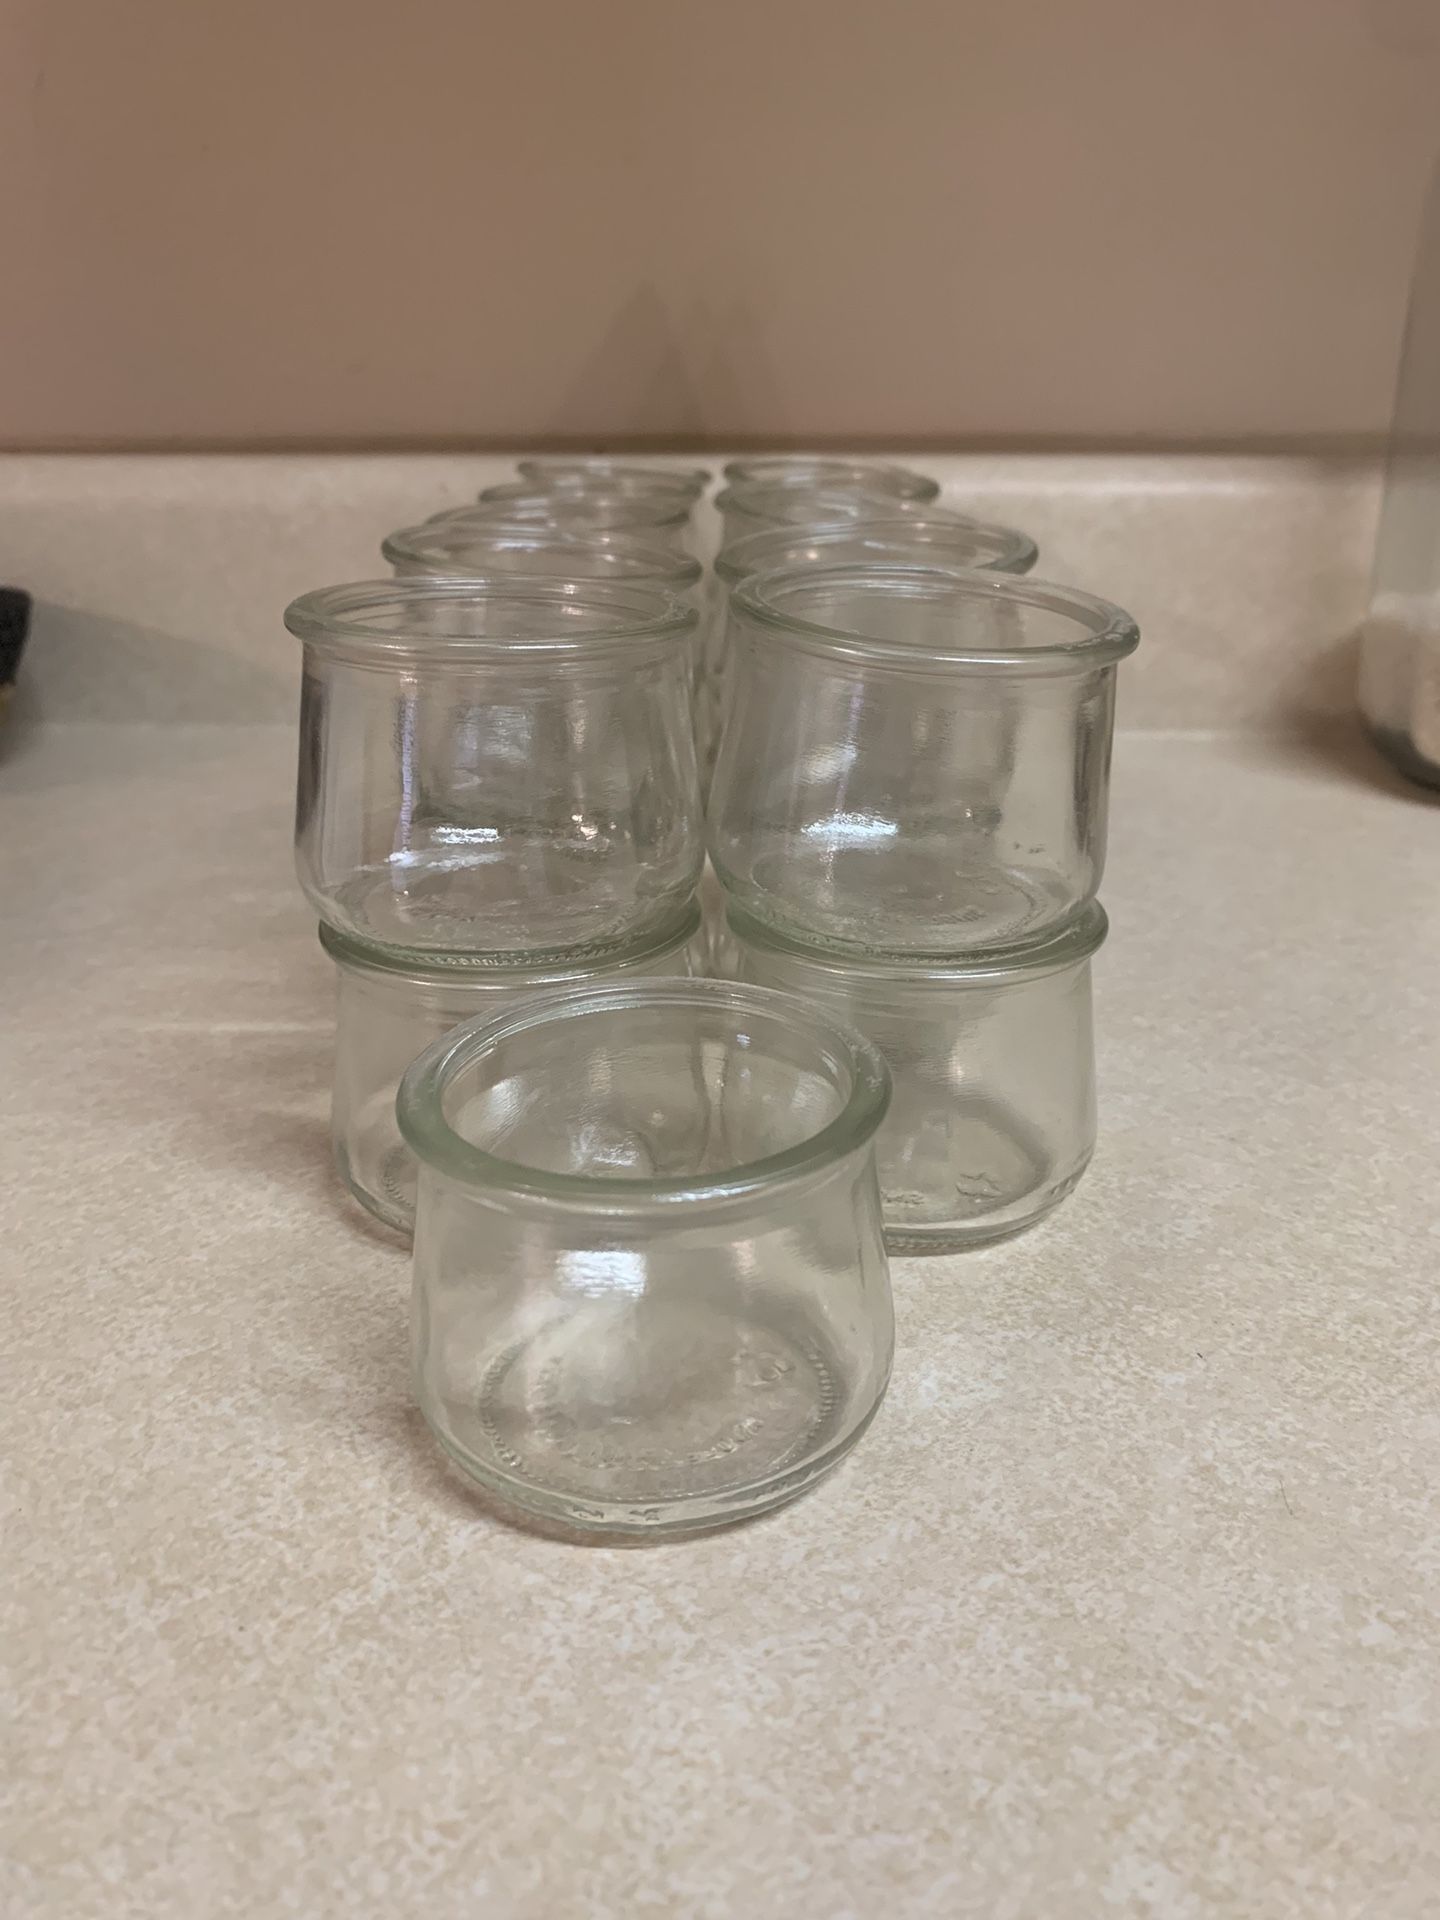 21 Small Glass Candle Holders